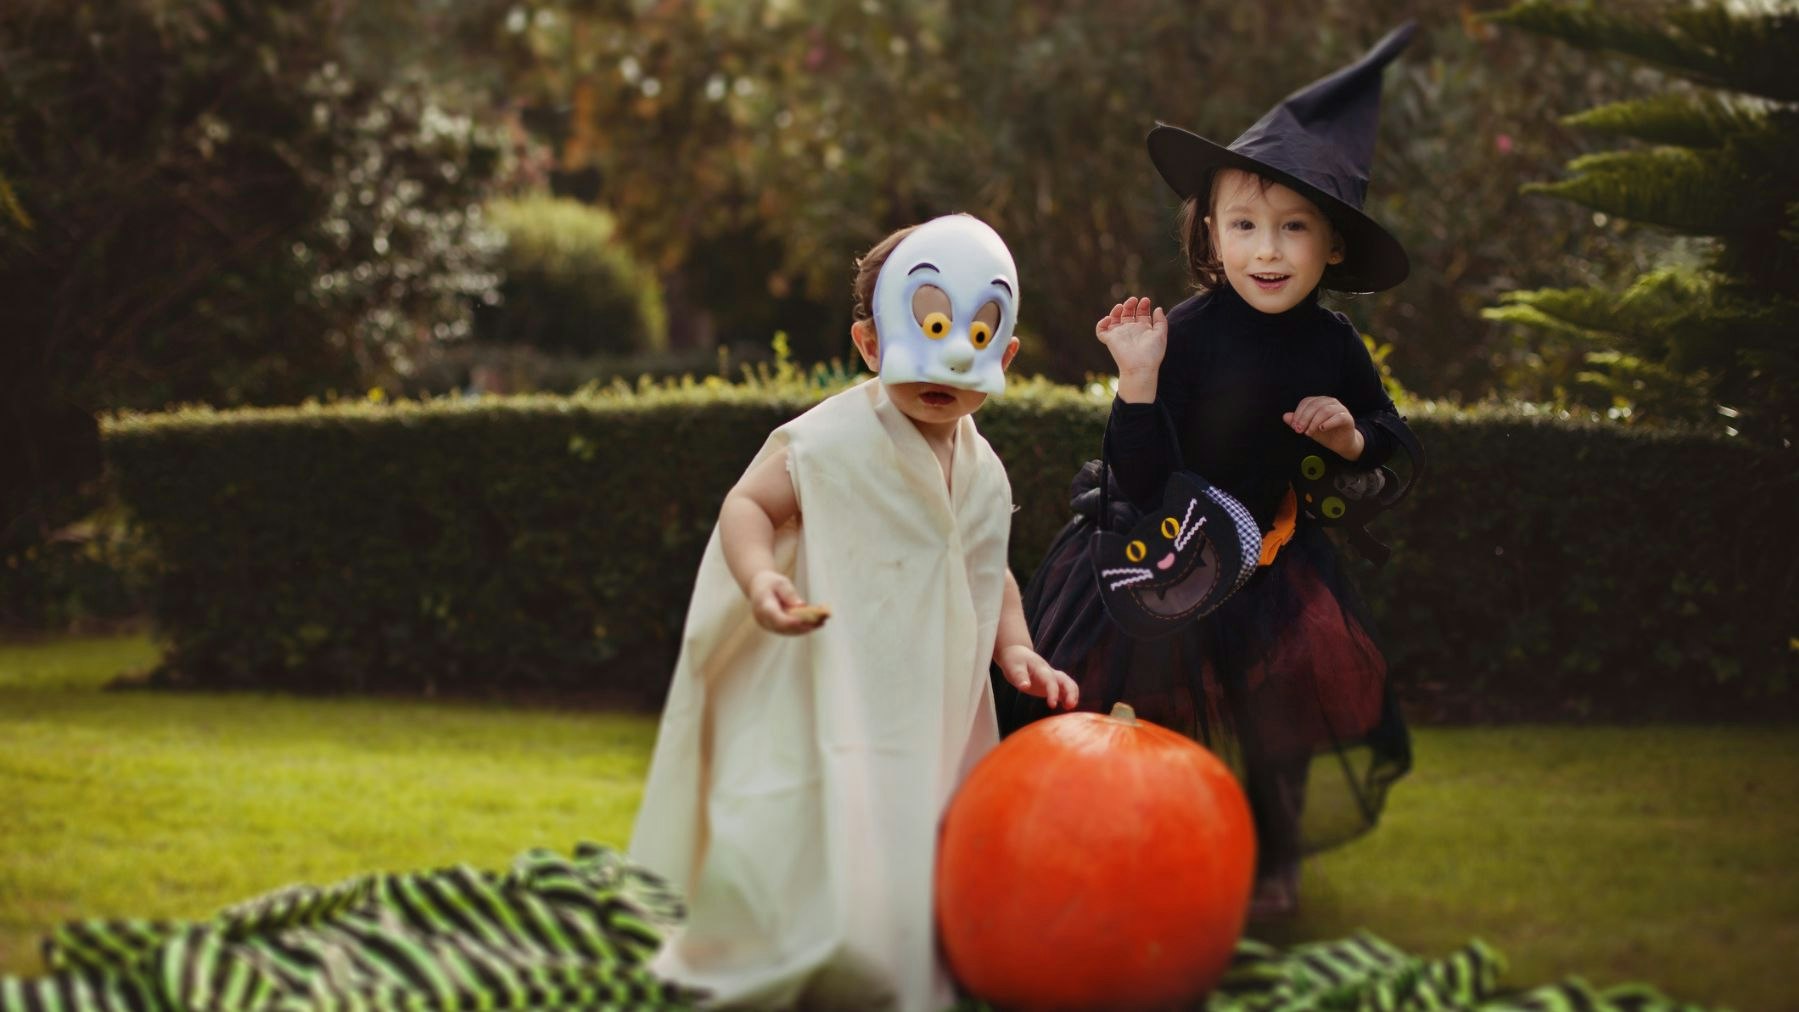 13 Of The Scariest Halloween Costumes For Children | Family | Closer